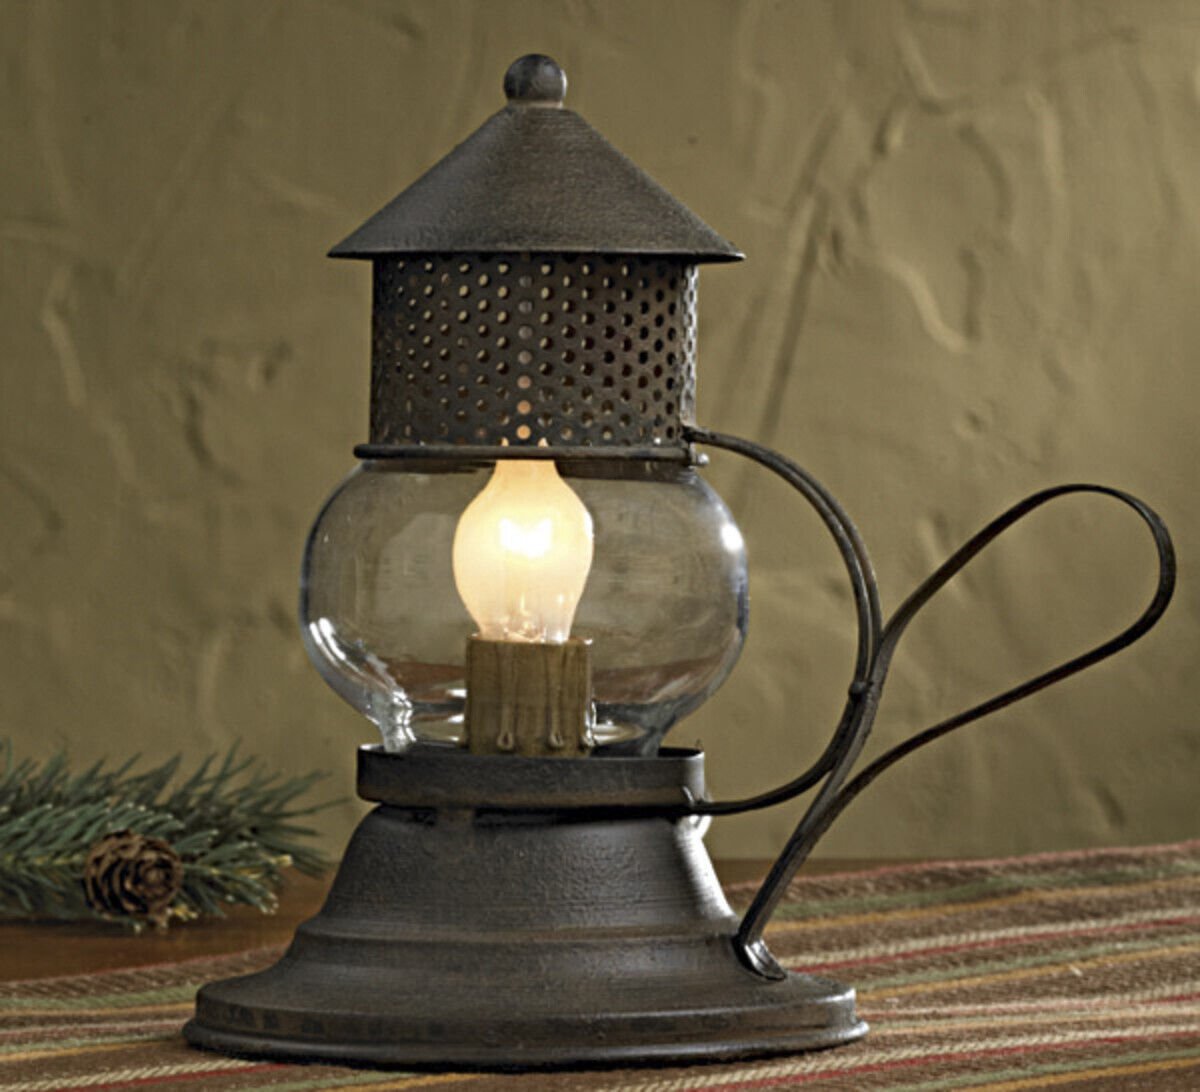 Primitive Country Electric Mini Onion Reproduction Accent Light - The Primitive Pineapple Collection